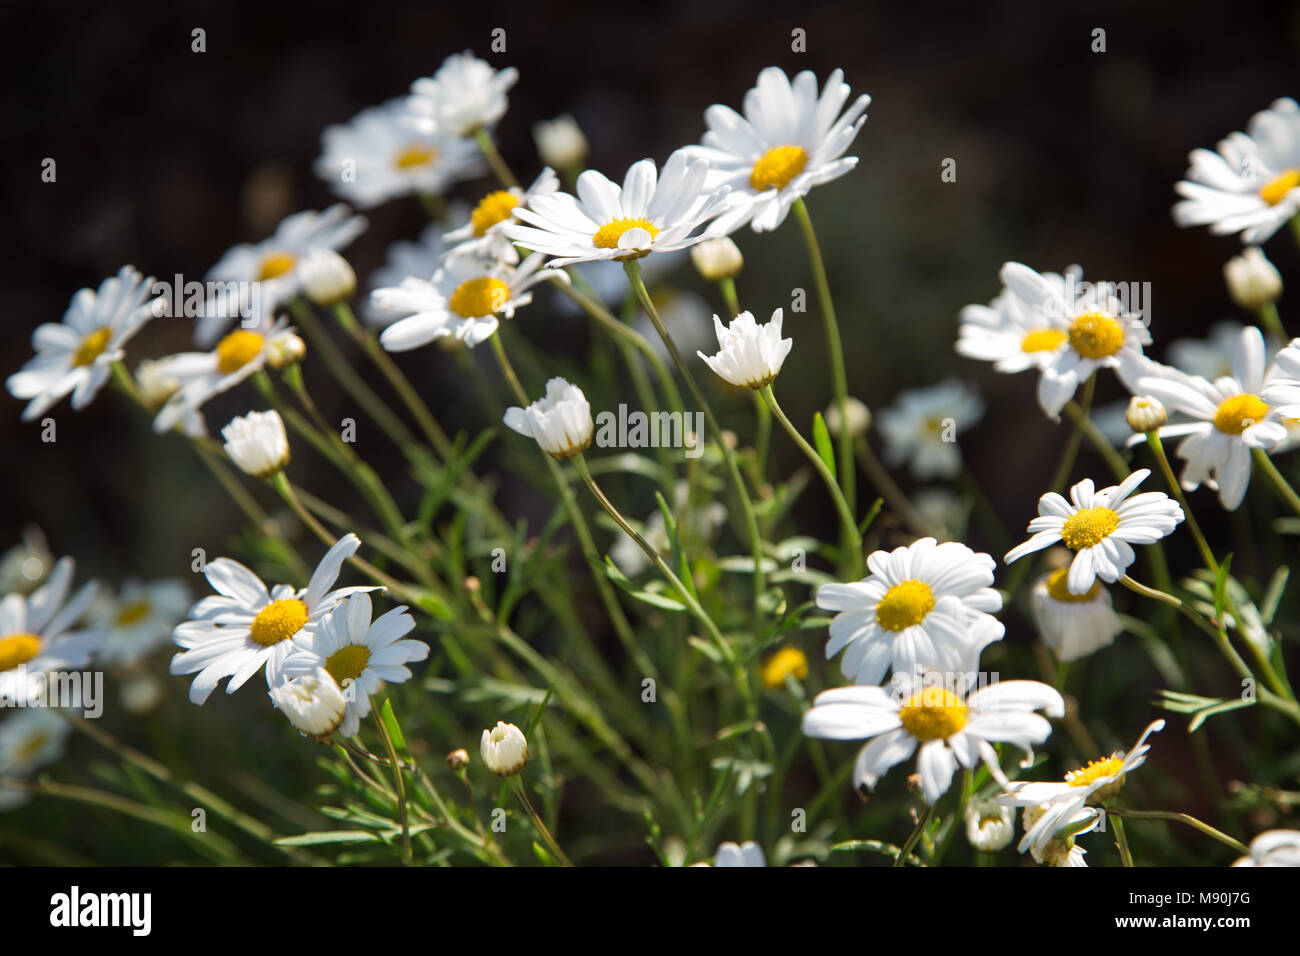 Marguerite, margueries, (argyranthemum) in flower, a member of the asteraceae family Stock Photo